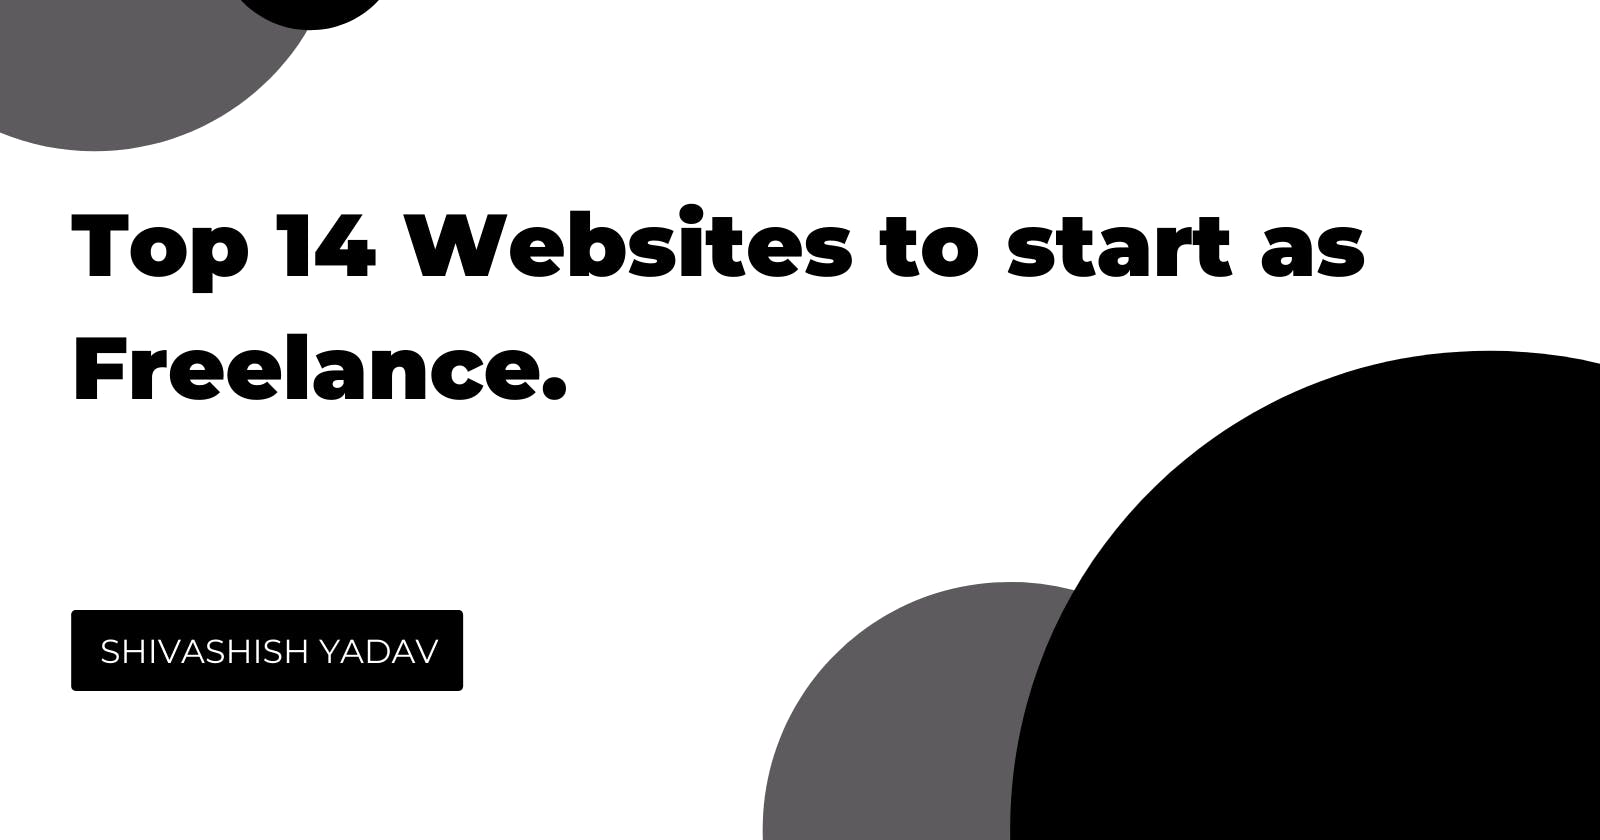 Less known top 14 Websites to start as freelance. + bonus 60 website links from ireviews.com